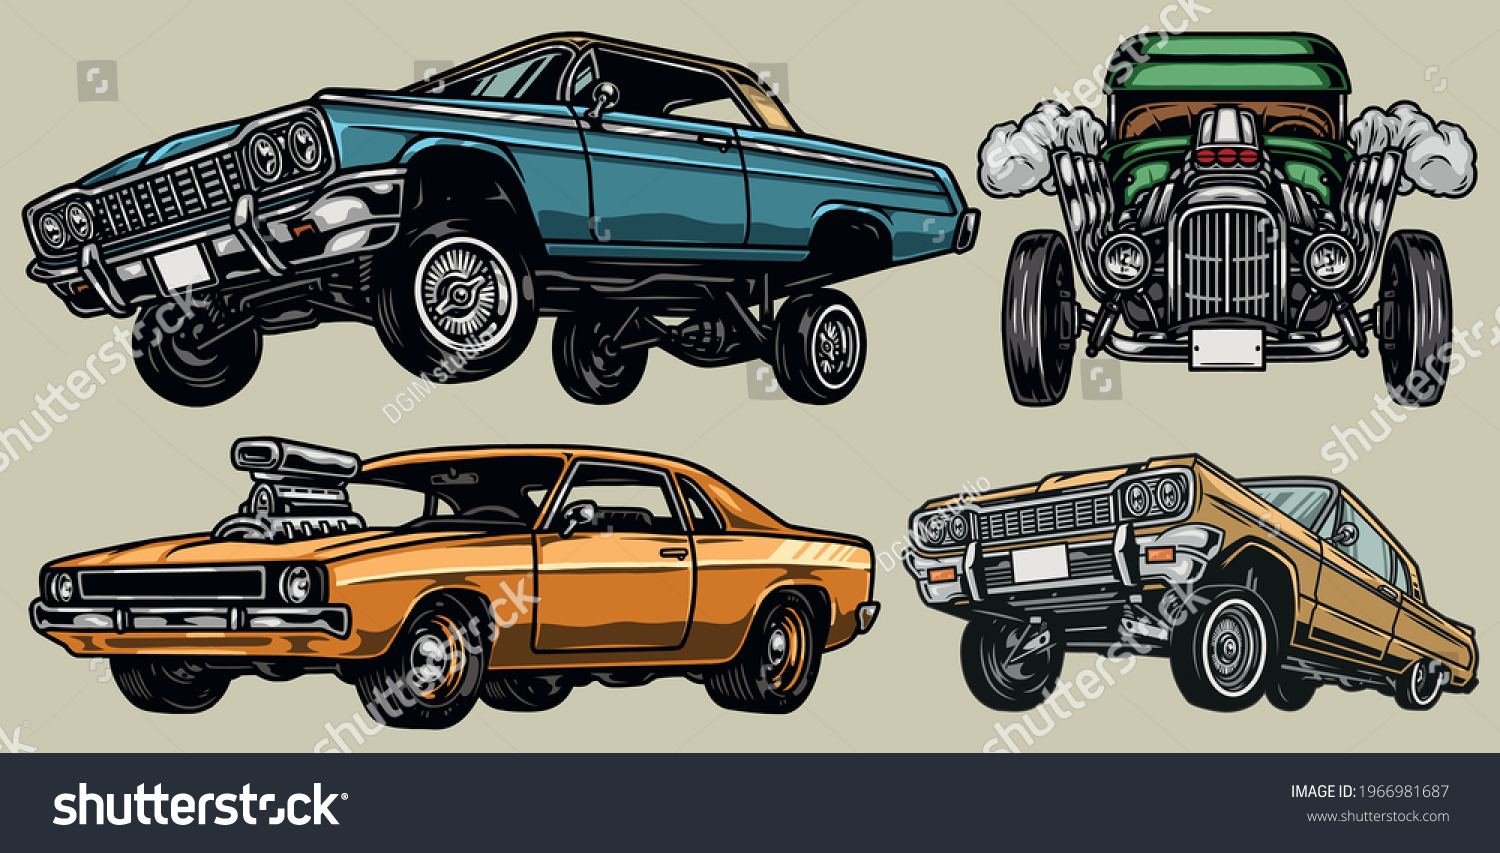 SVG of Retro custom cars colorful vintage concept with hot rod muscle and lowrider automobiles isolated vector illustration svg